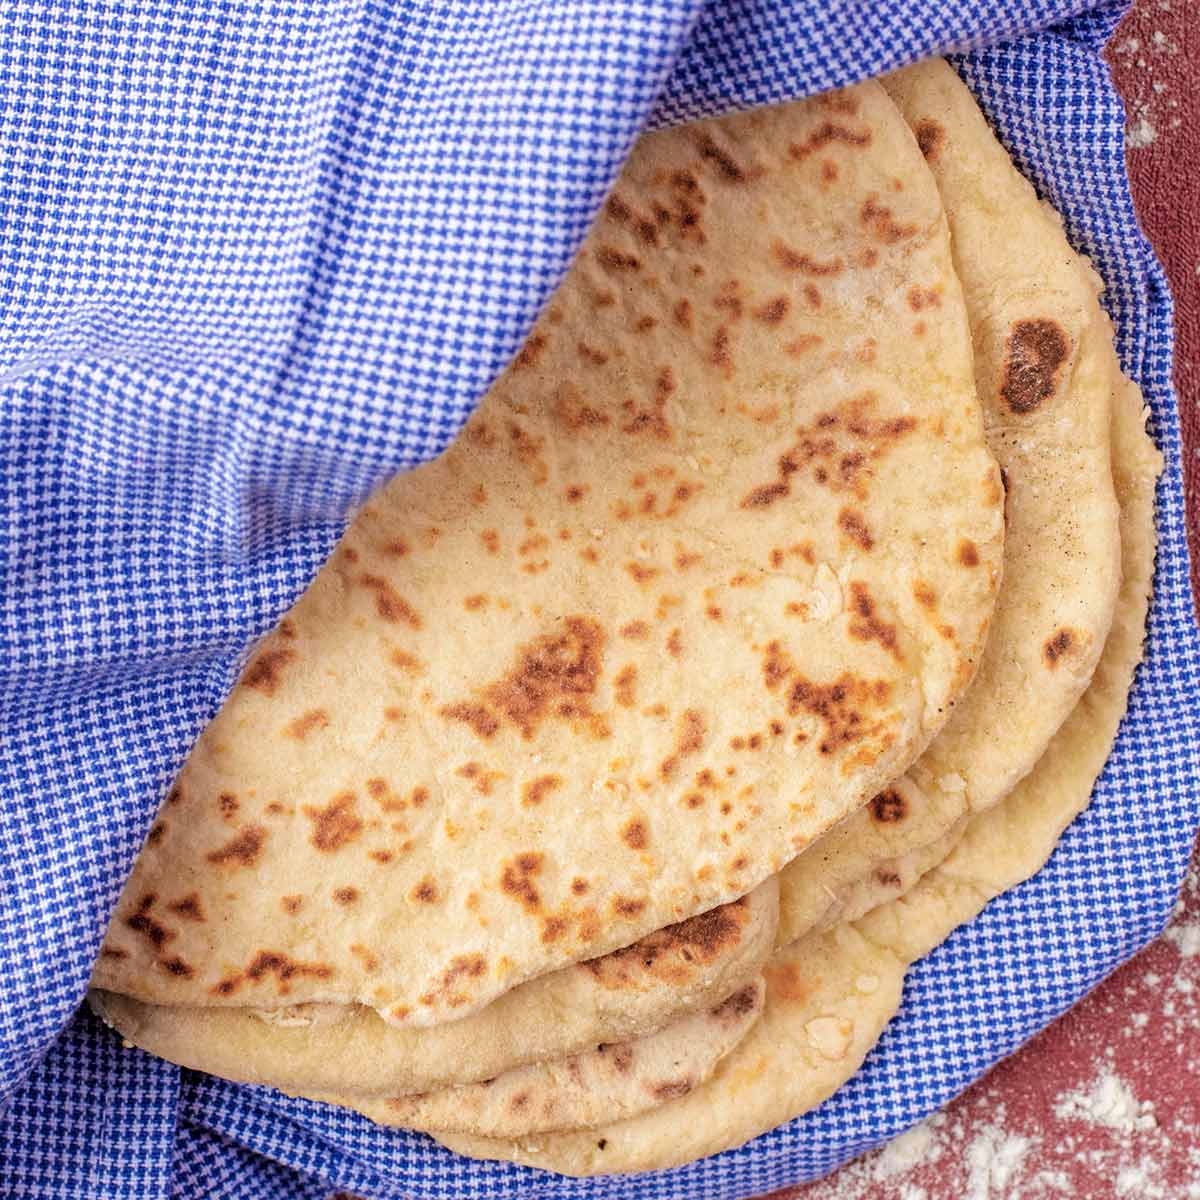 Easy Homemade Flatbreads wrapped in a towel. Flour is sprinkled around.